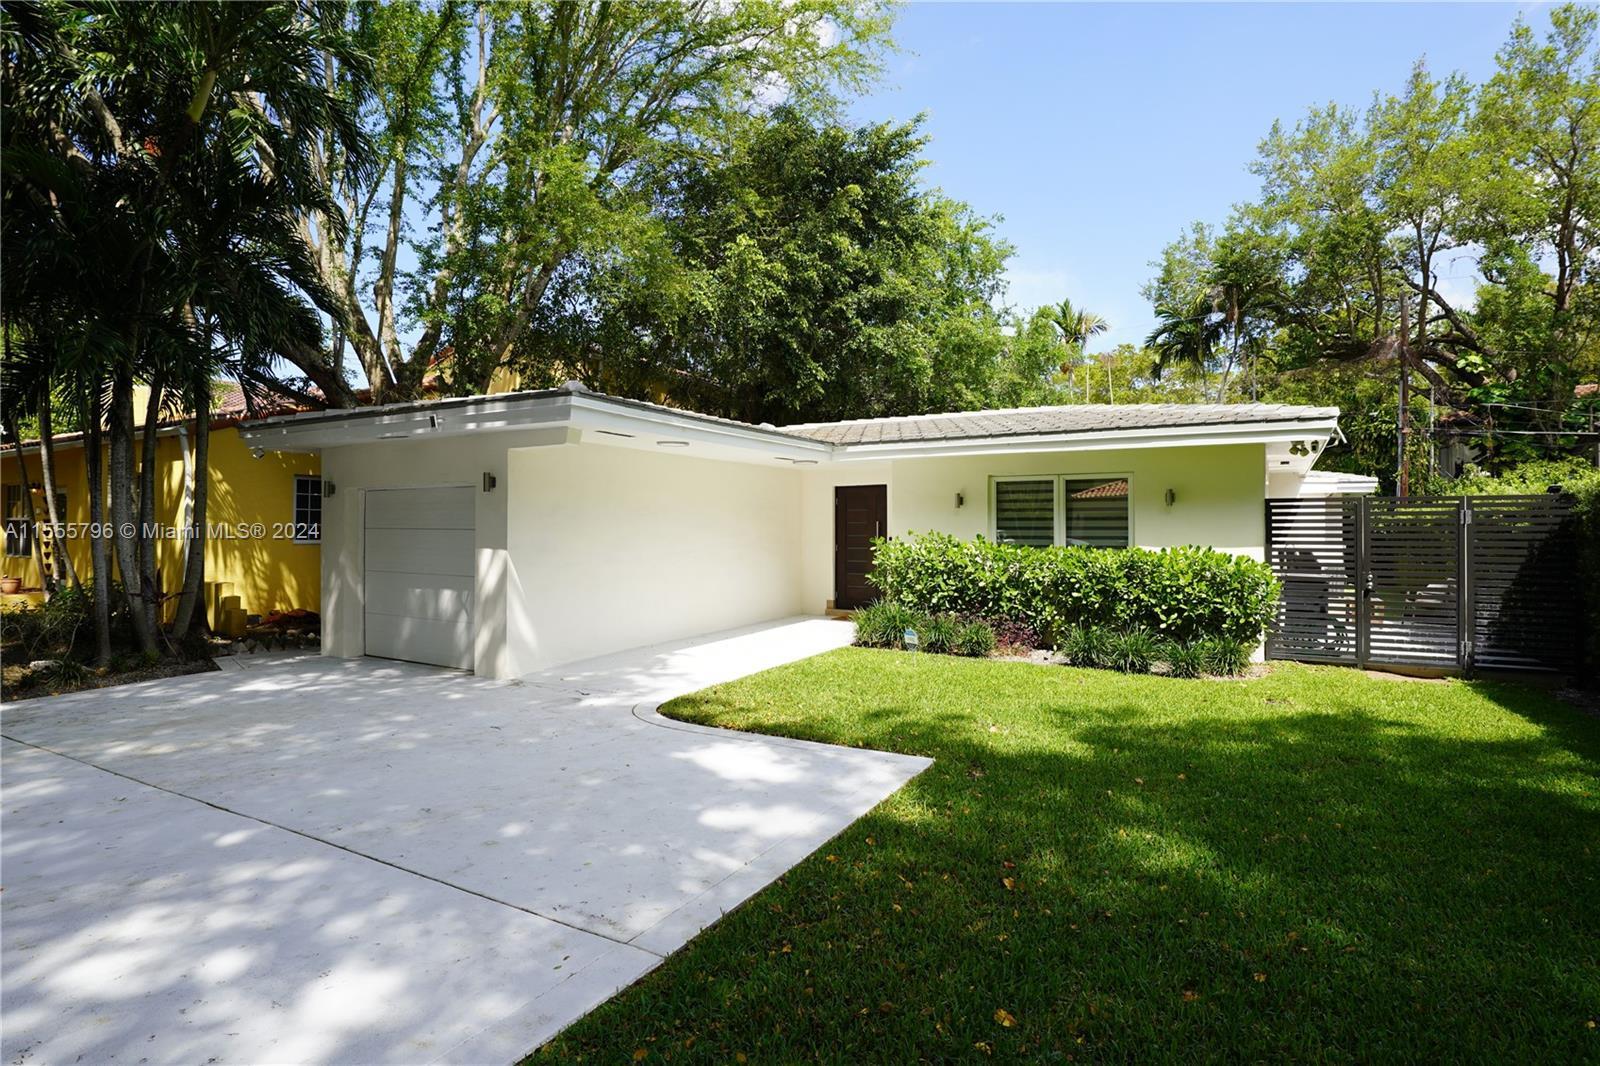 Photo of 129 Cadima Ave in Coral Gables, FL